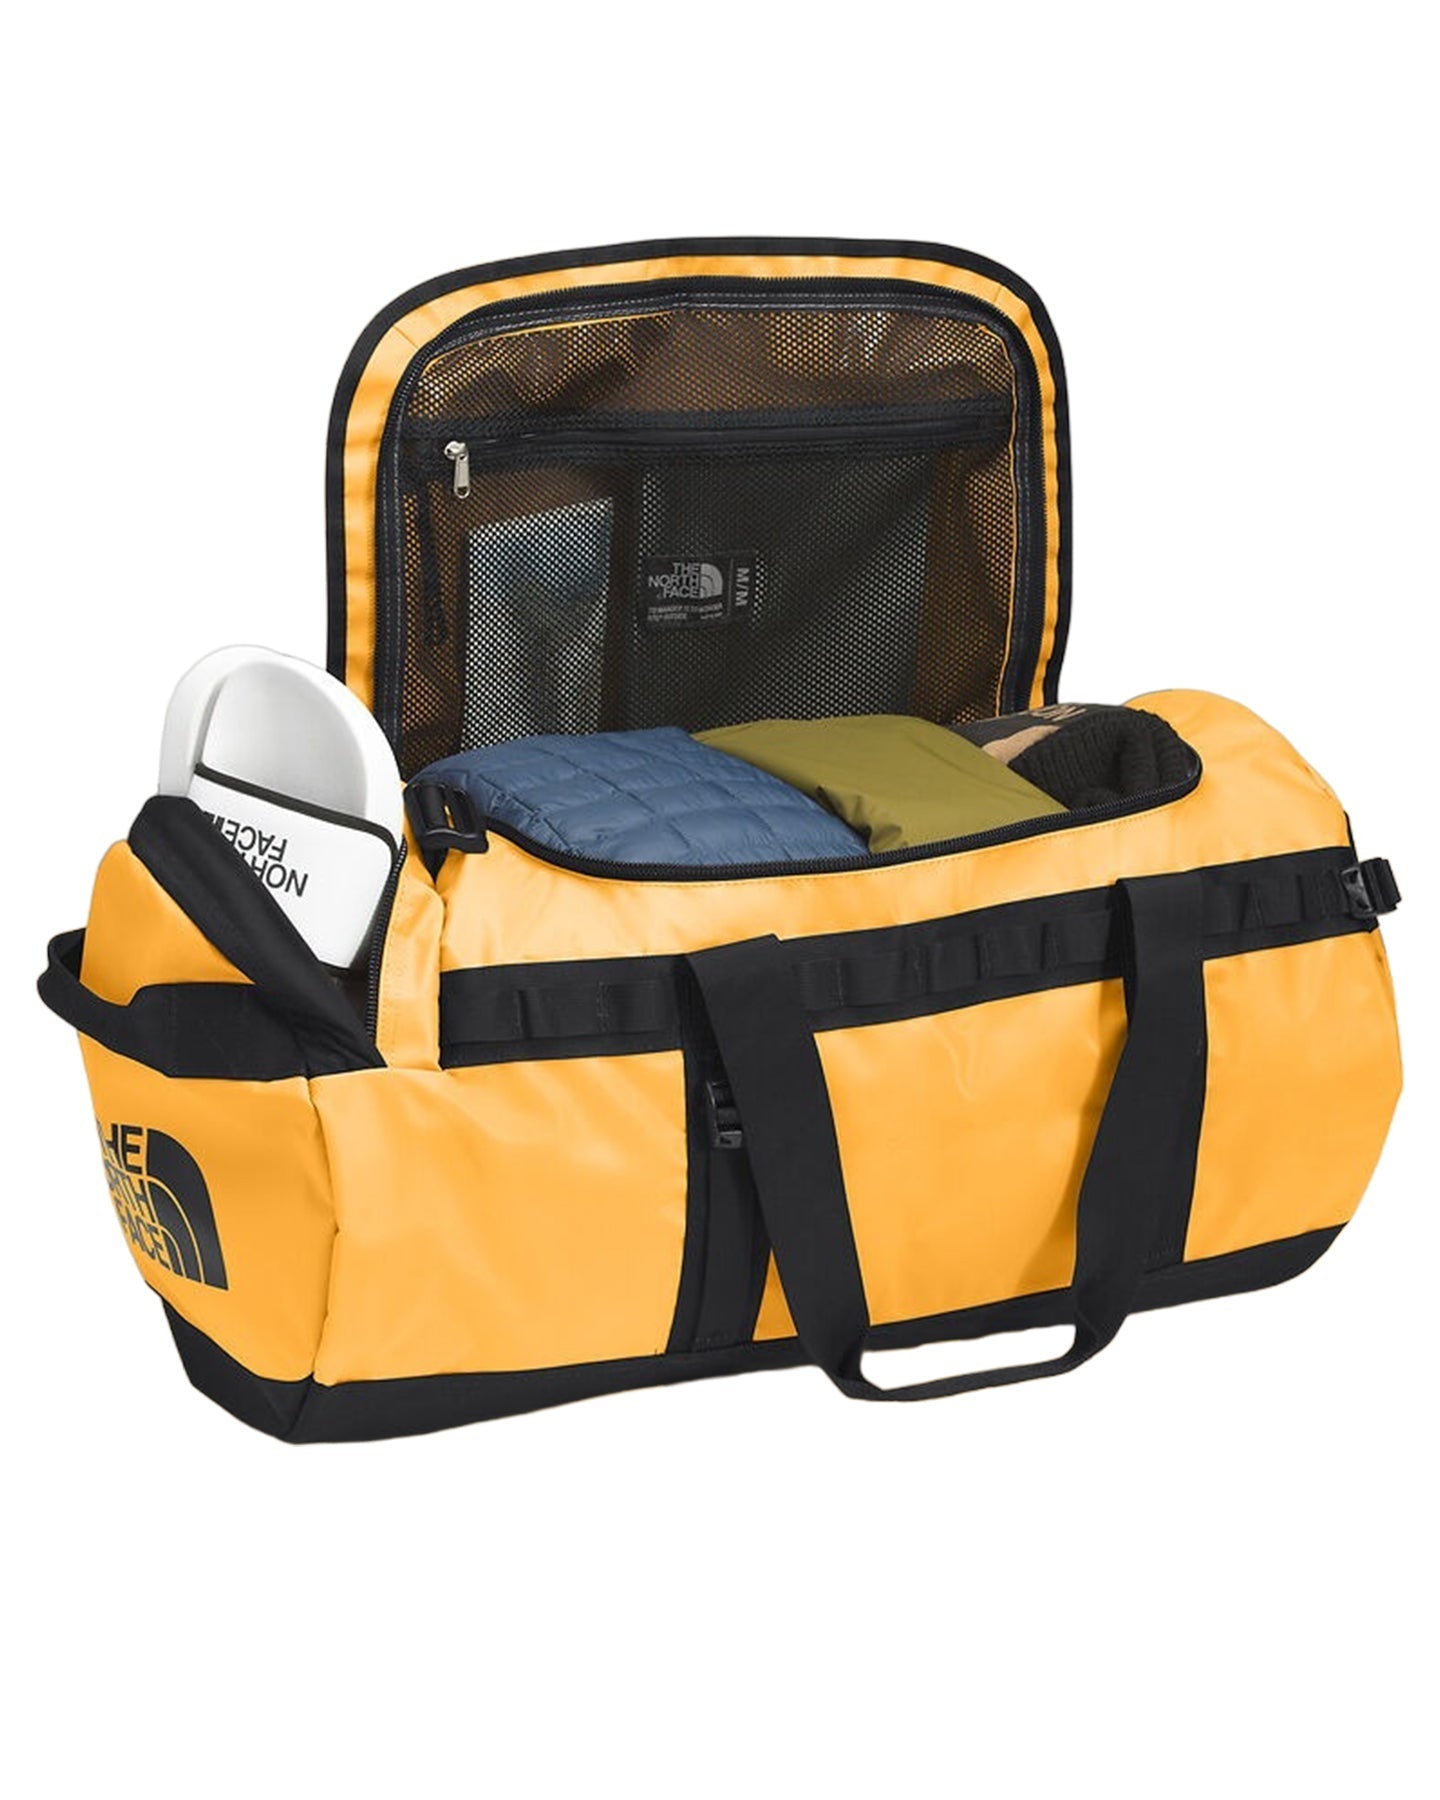 The North Face Base Camp Duffel M - Summit Gold/Tnf Black Luggage Bags - SnowSkiersWarehouse